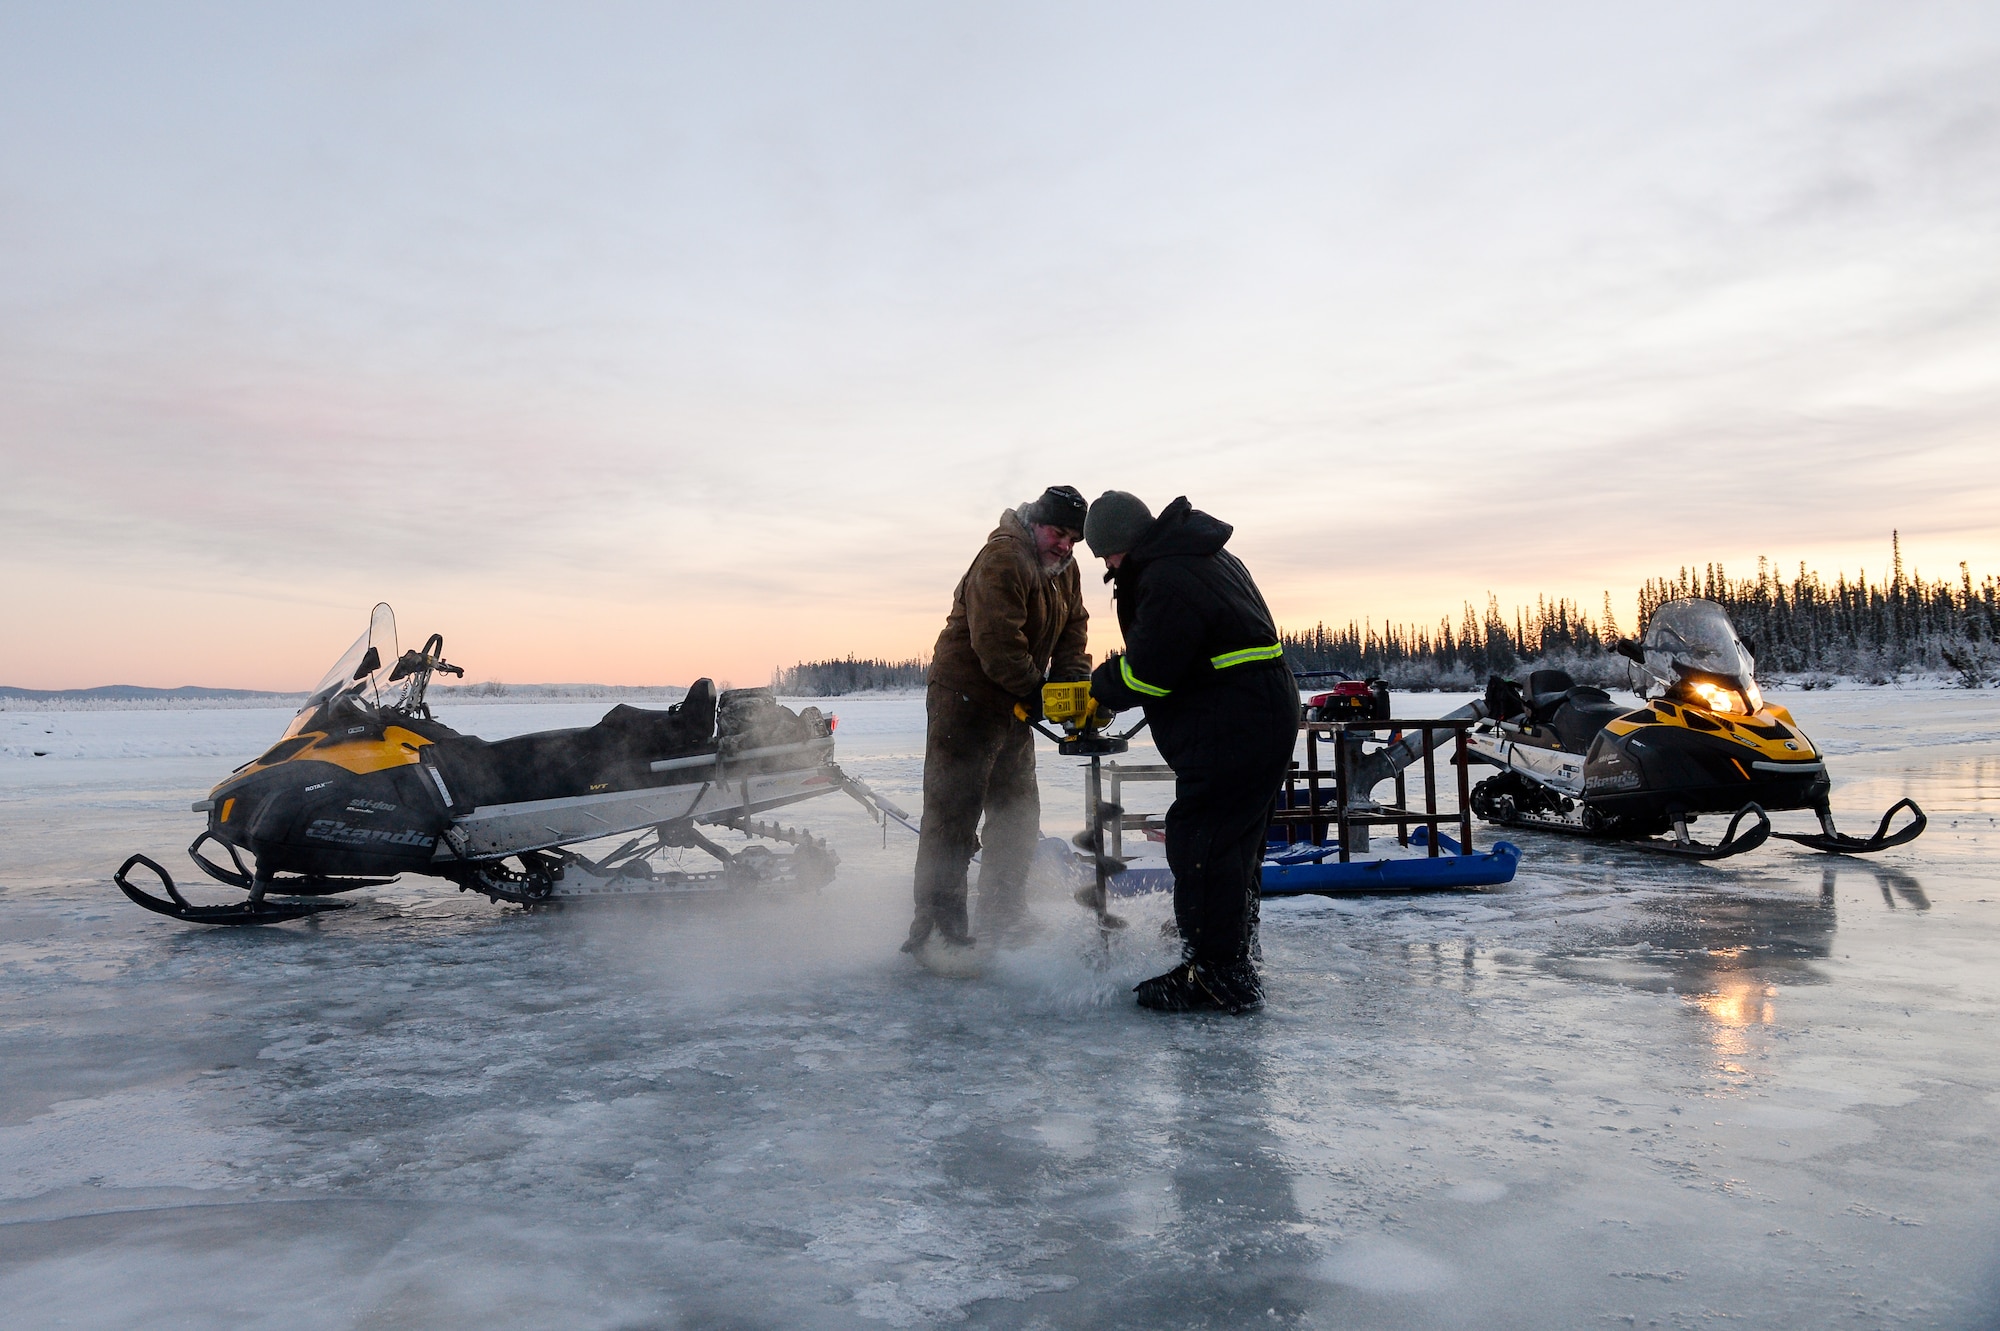 Senior Airmen Tyler Dray and Jerry Mitchell use an ice auger Nov. 20, 2014, while constructing an ice bridge in Fairbanks, Alaska. The bridge must be constructed every other year to provide access to the $20 million range complex used to train pilots from around the world during Red Flag-Alaska exercises. Dray is a range maintenance structures journeyman and Mitchell is a heavy equipment operator with the 354th Civil Engineer Squadron on Eielson Air Force Base, Alaska. (U.S. Air Force photo/Staff Sgt. Shawn Nickel)